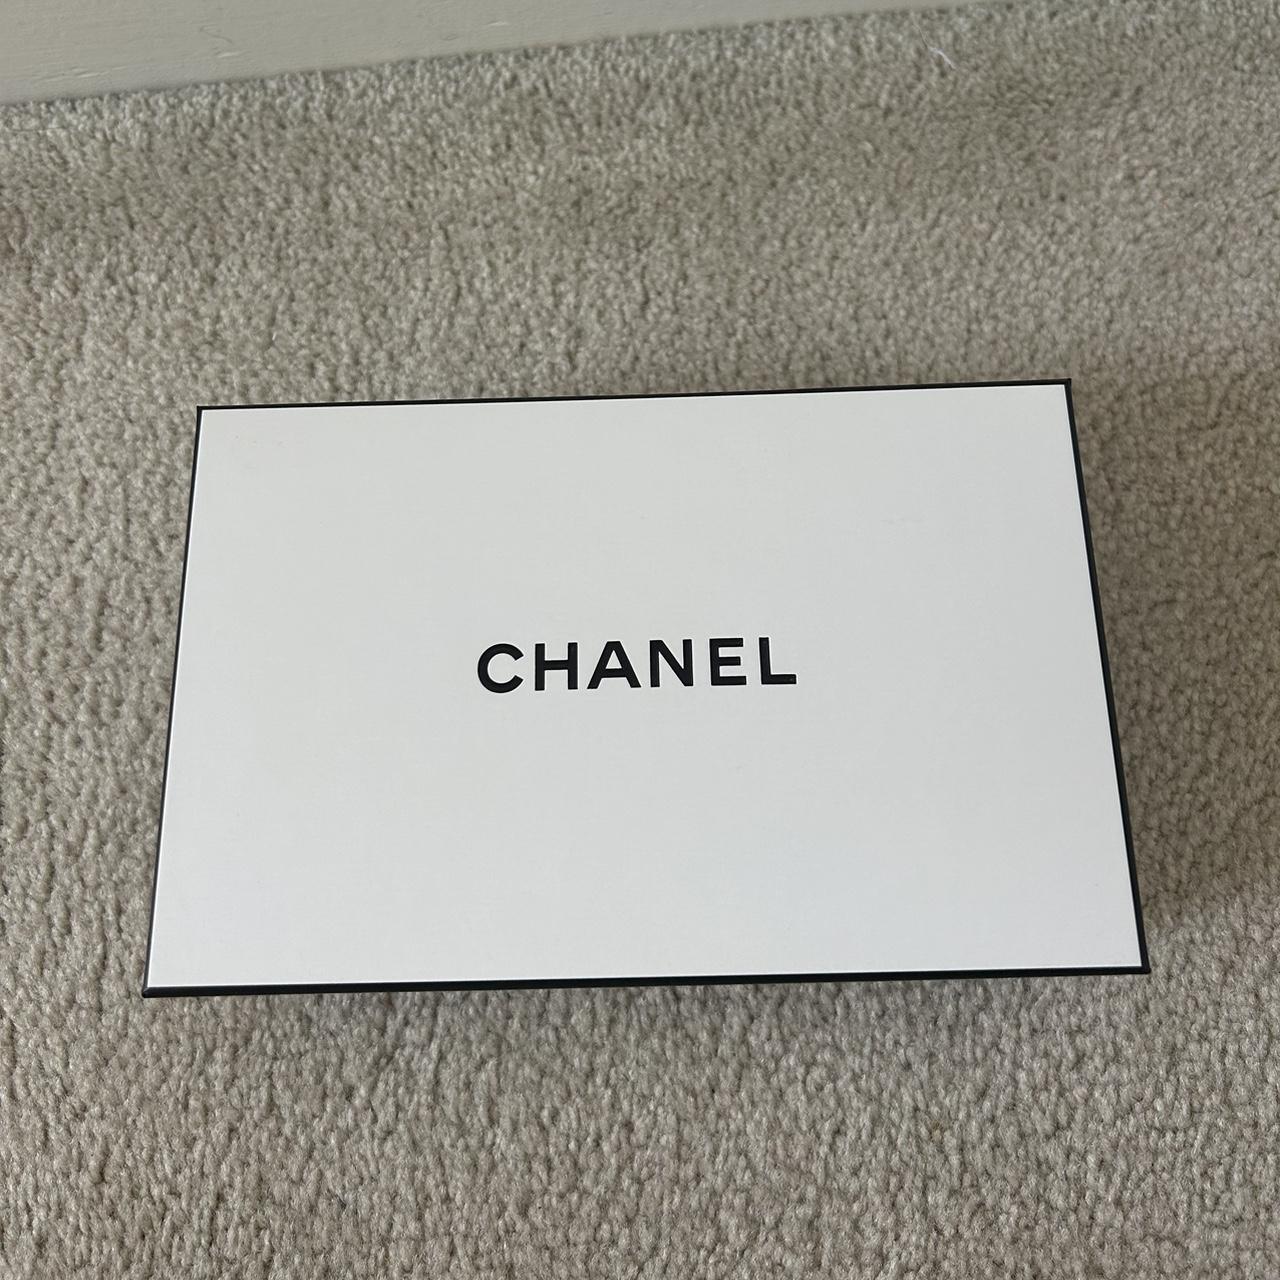 CHANEL, Other, Chanel Gift Box Wchanel Tissue Paper Confetti